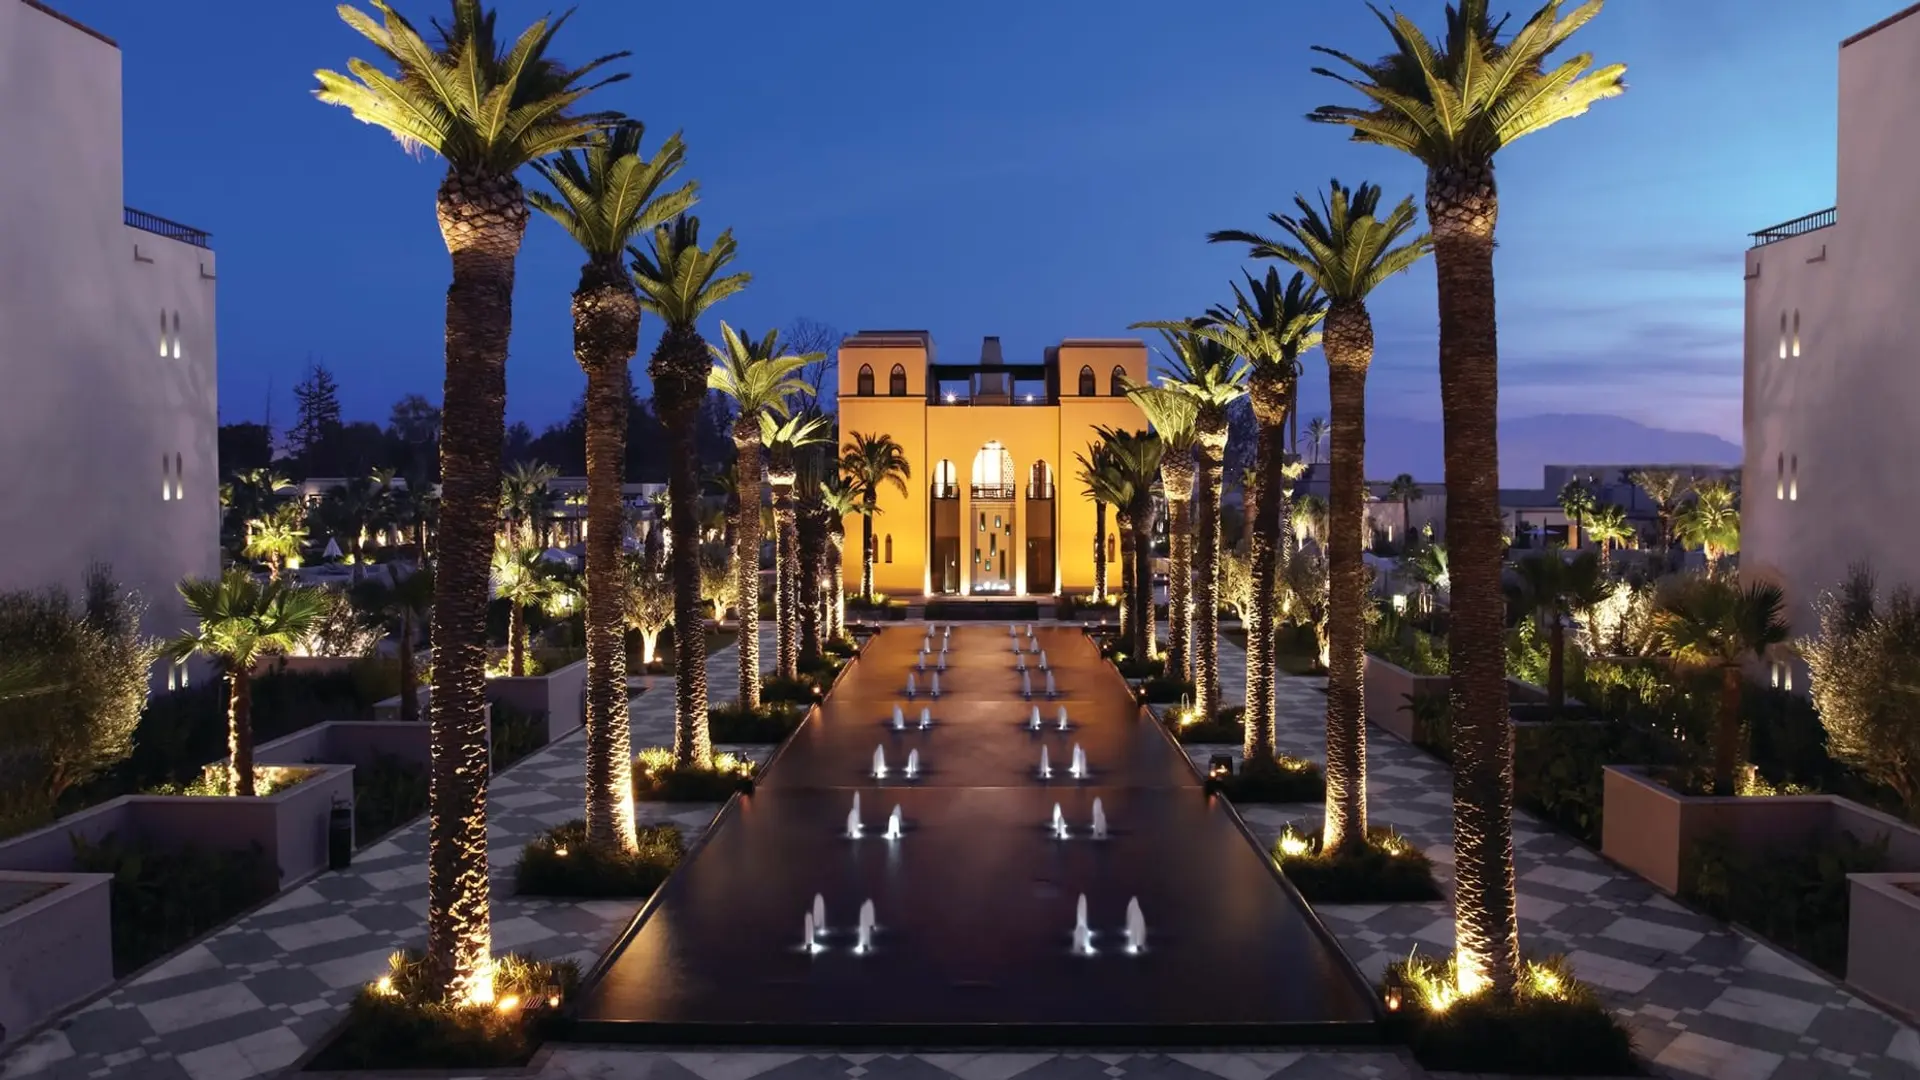 Palm trees, fountains and the pastel orange Four Seasons entrance